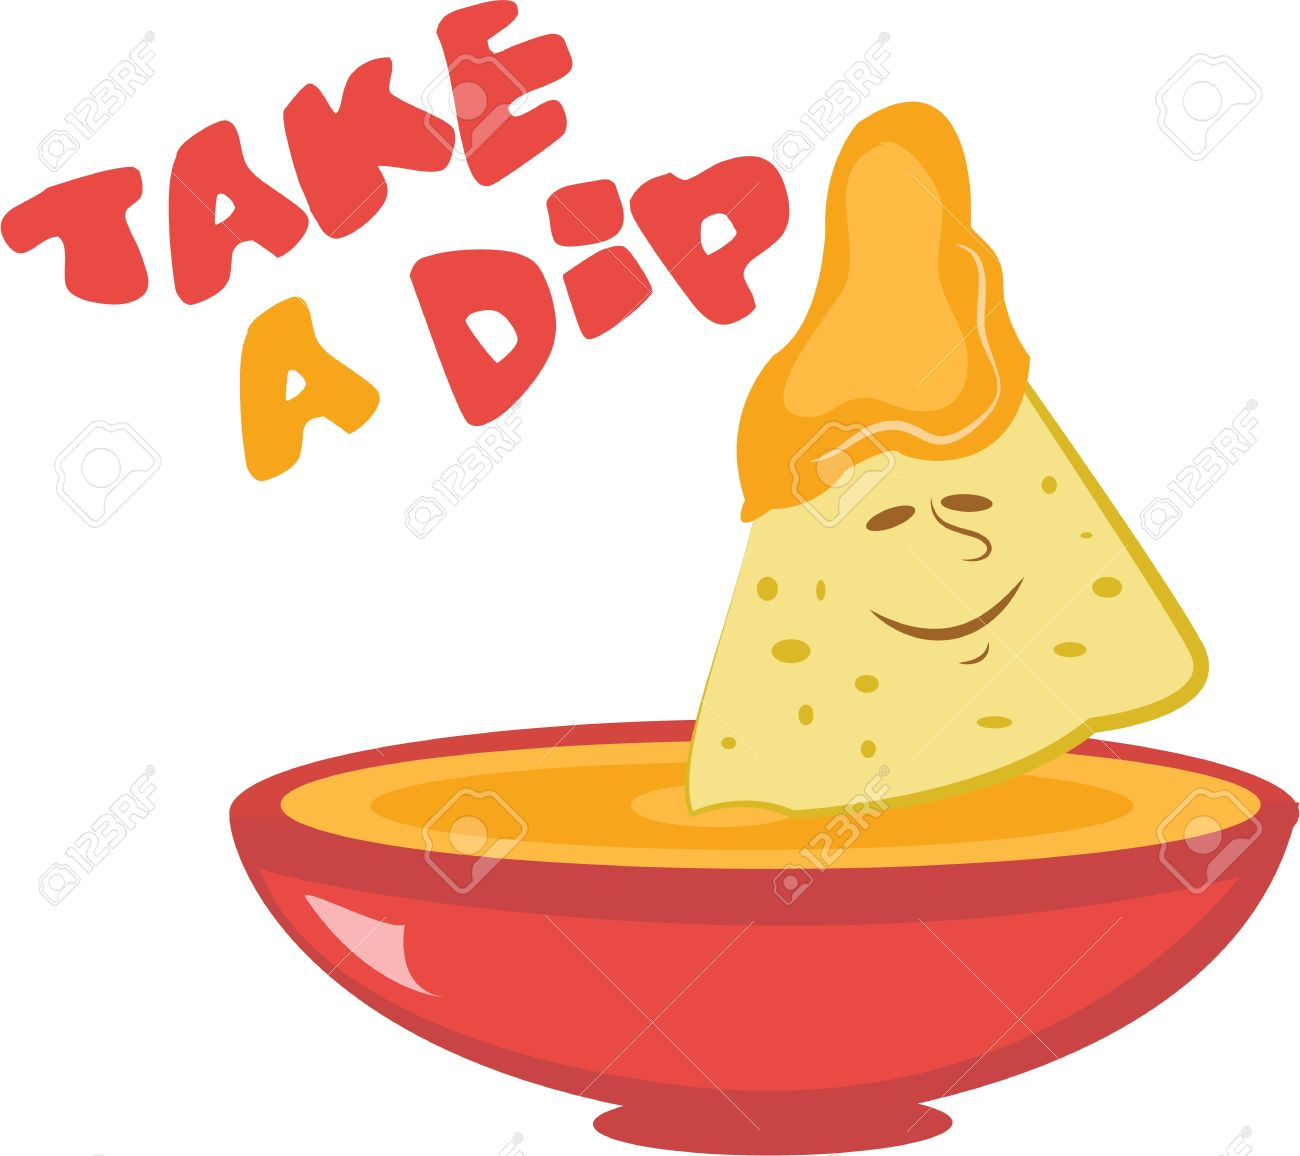 Clip Arts Related To : transparent tortilla chip clipart. 